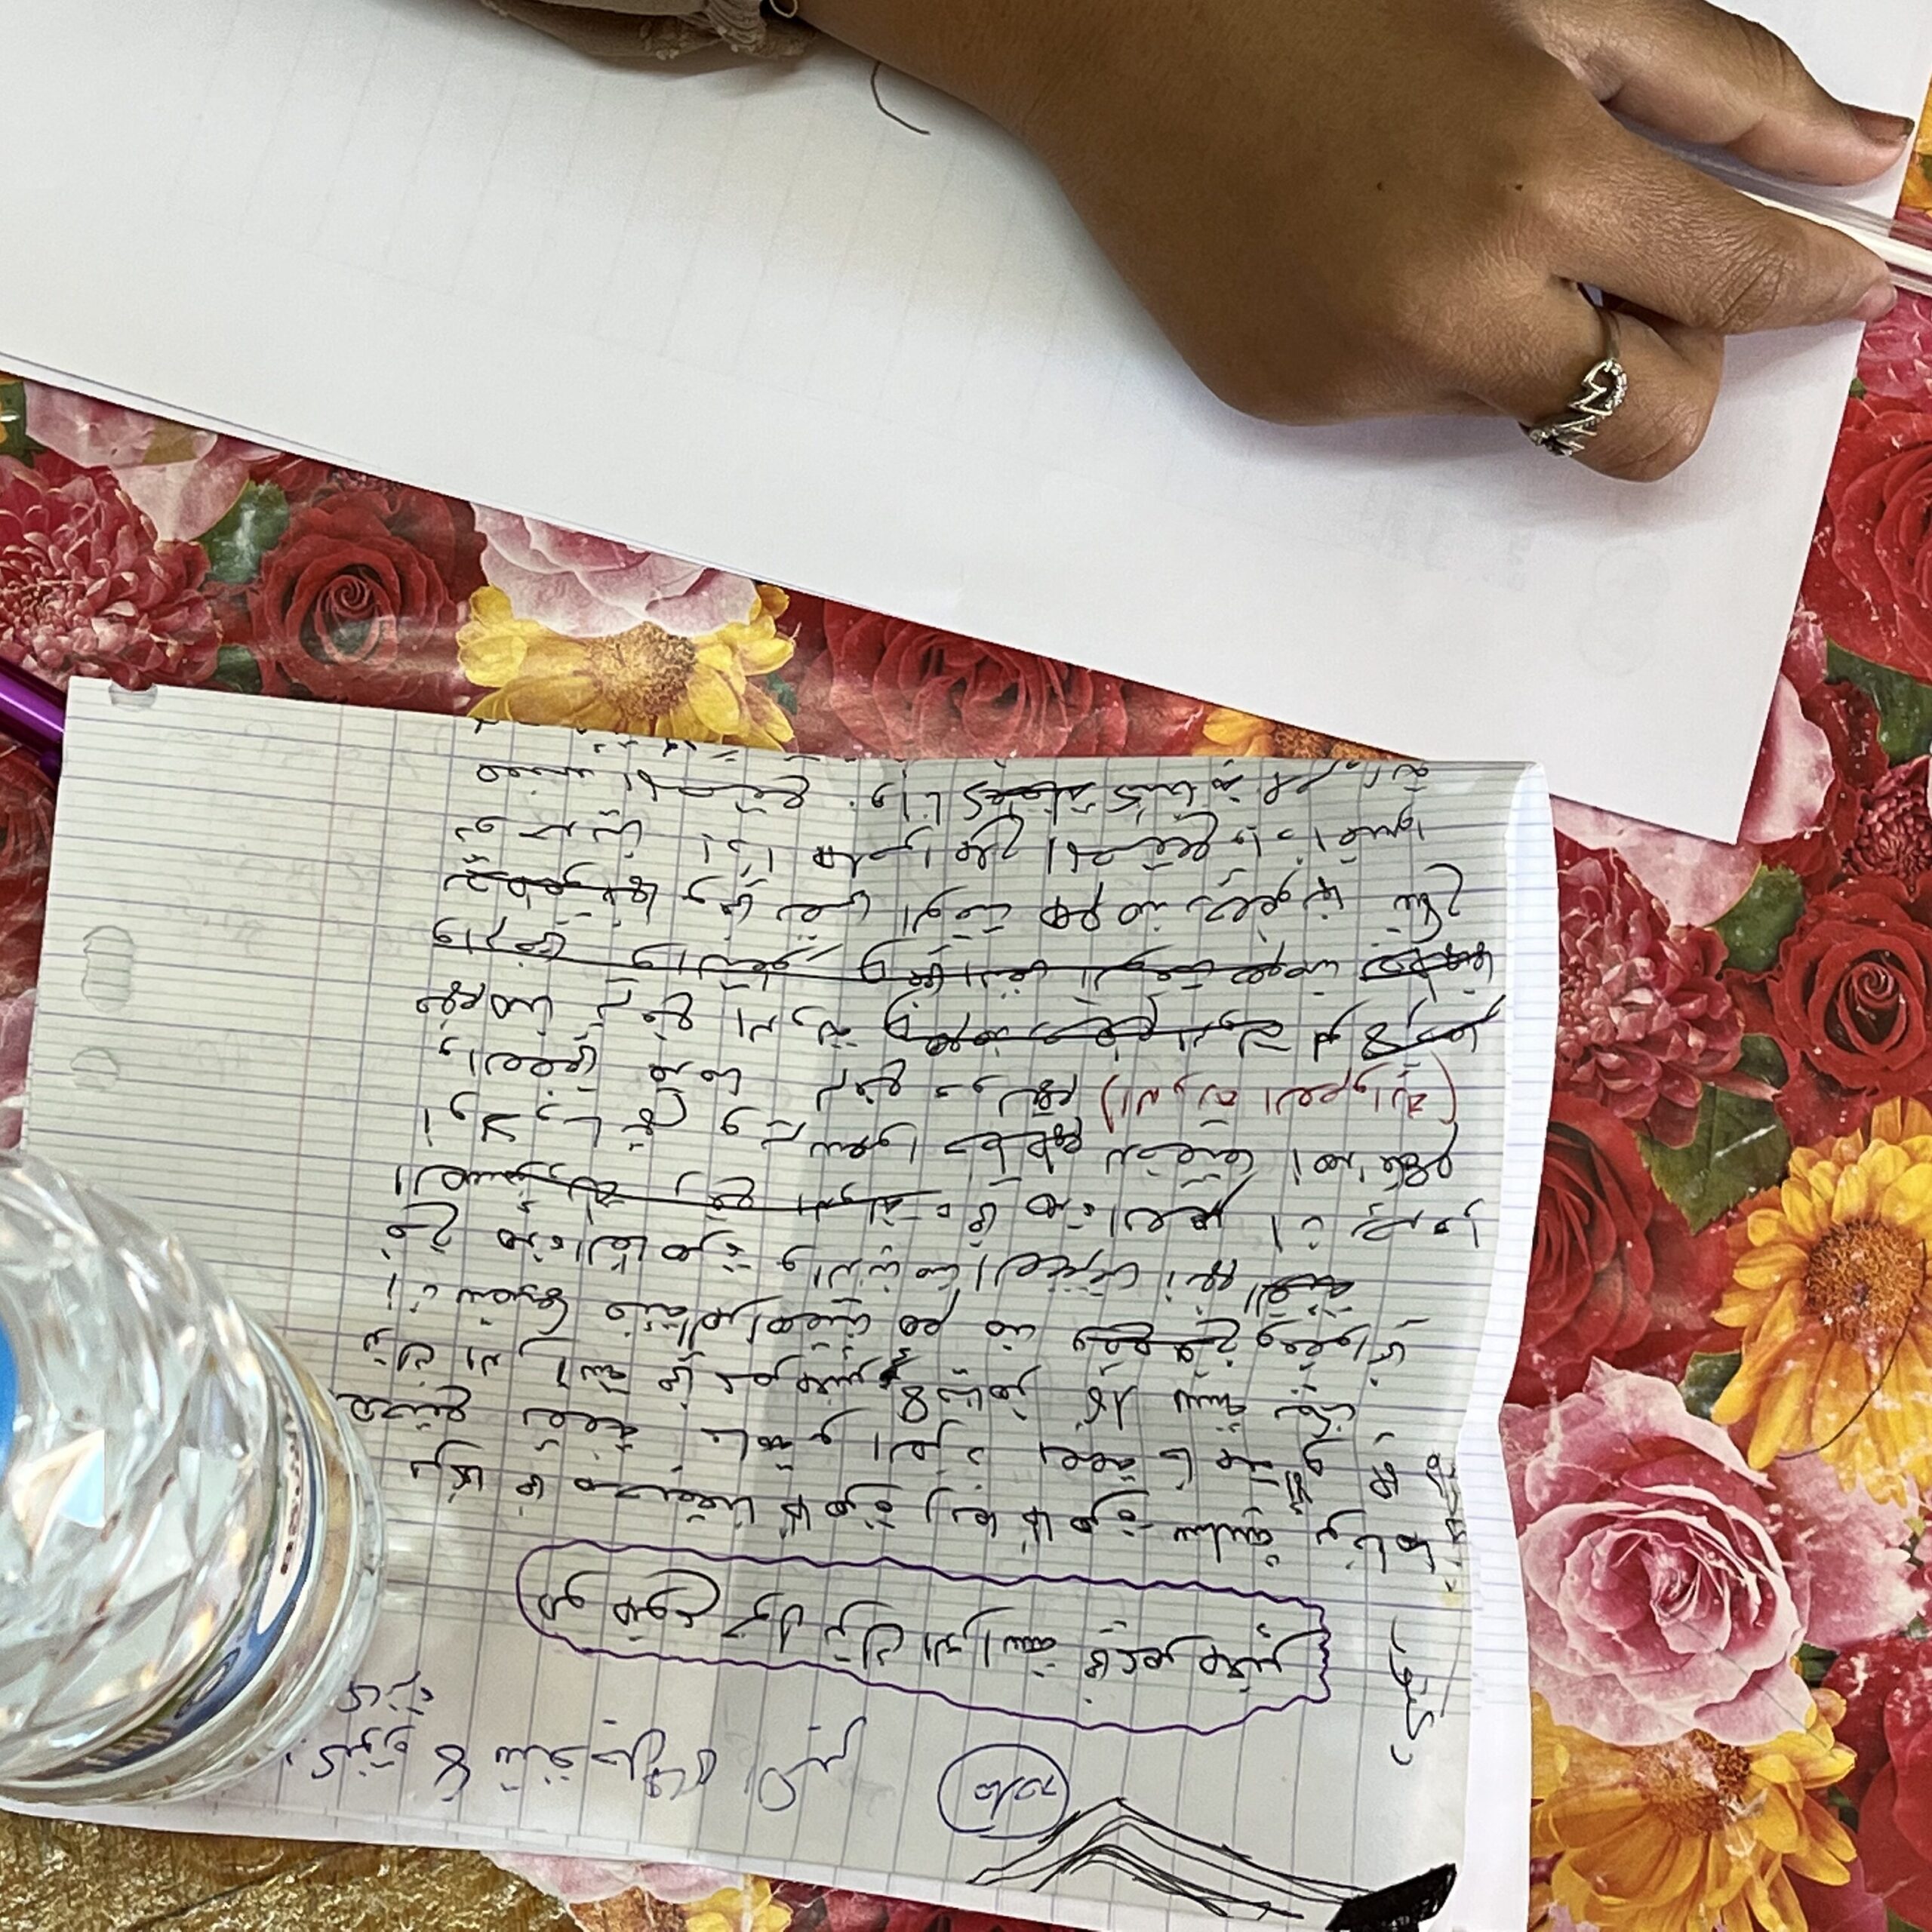 A piece of paper on which is written lines of Arabic text. A woman's hand holding a pen.